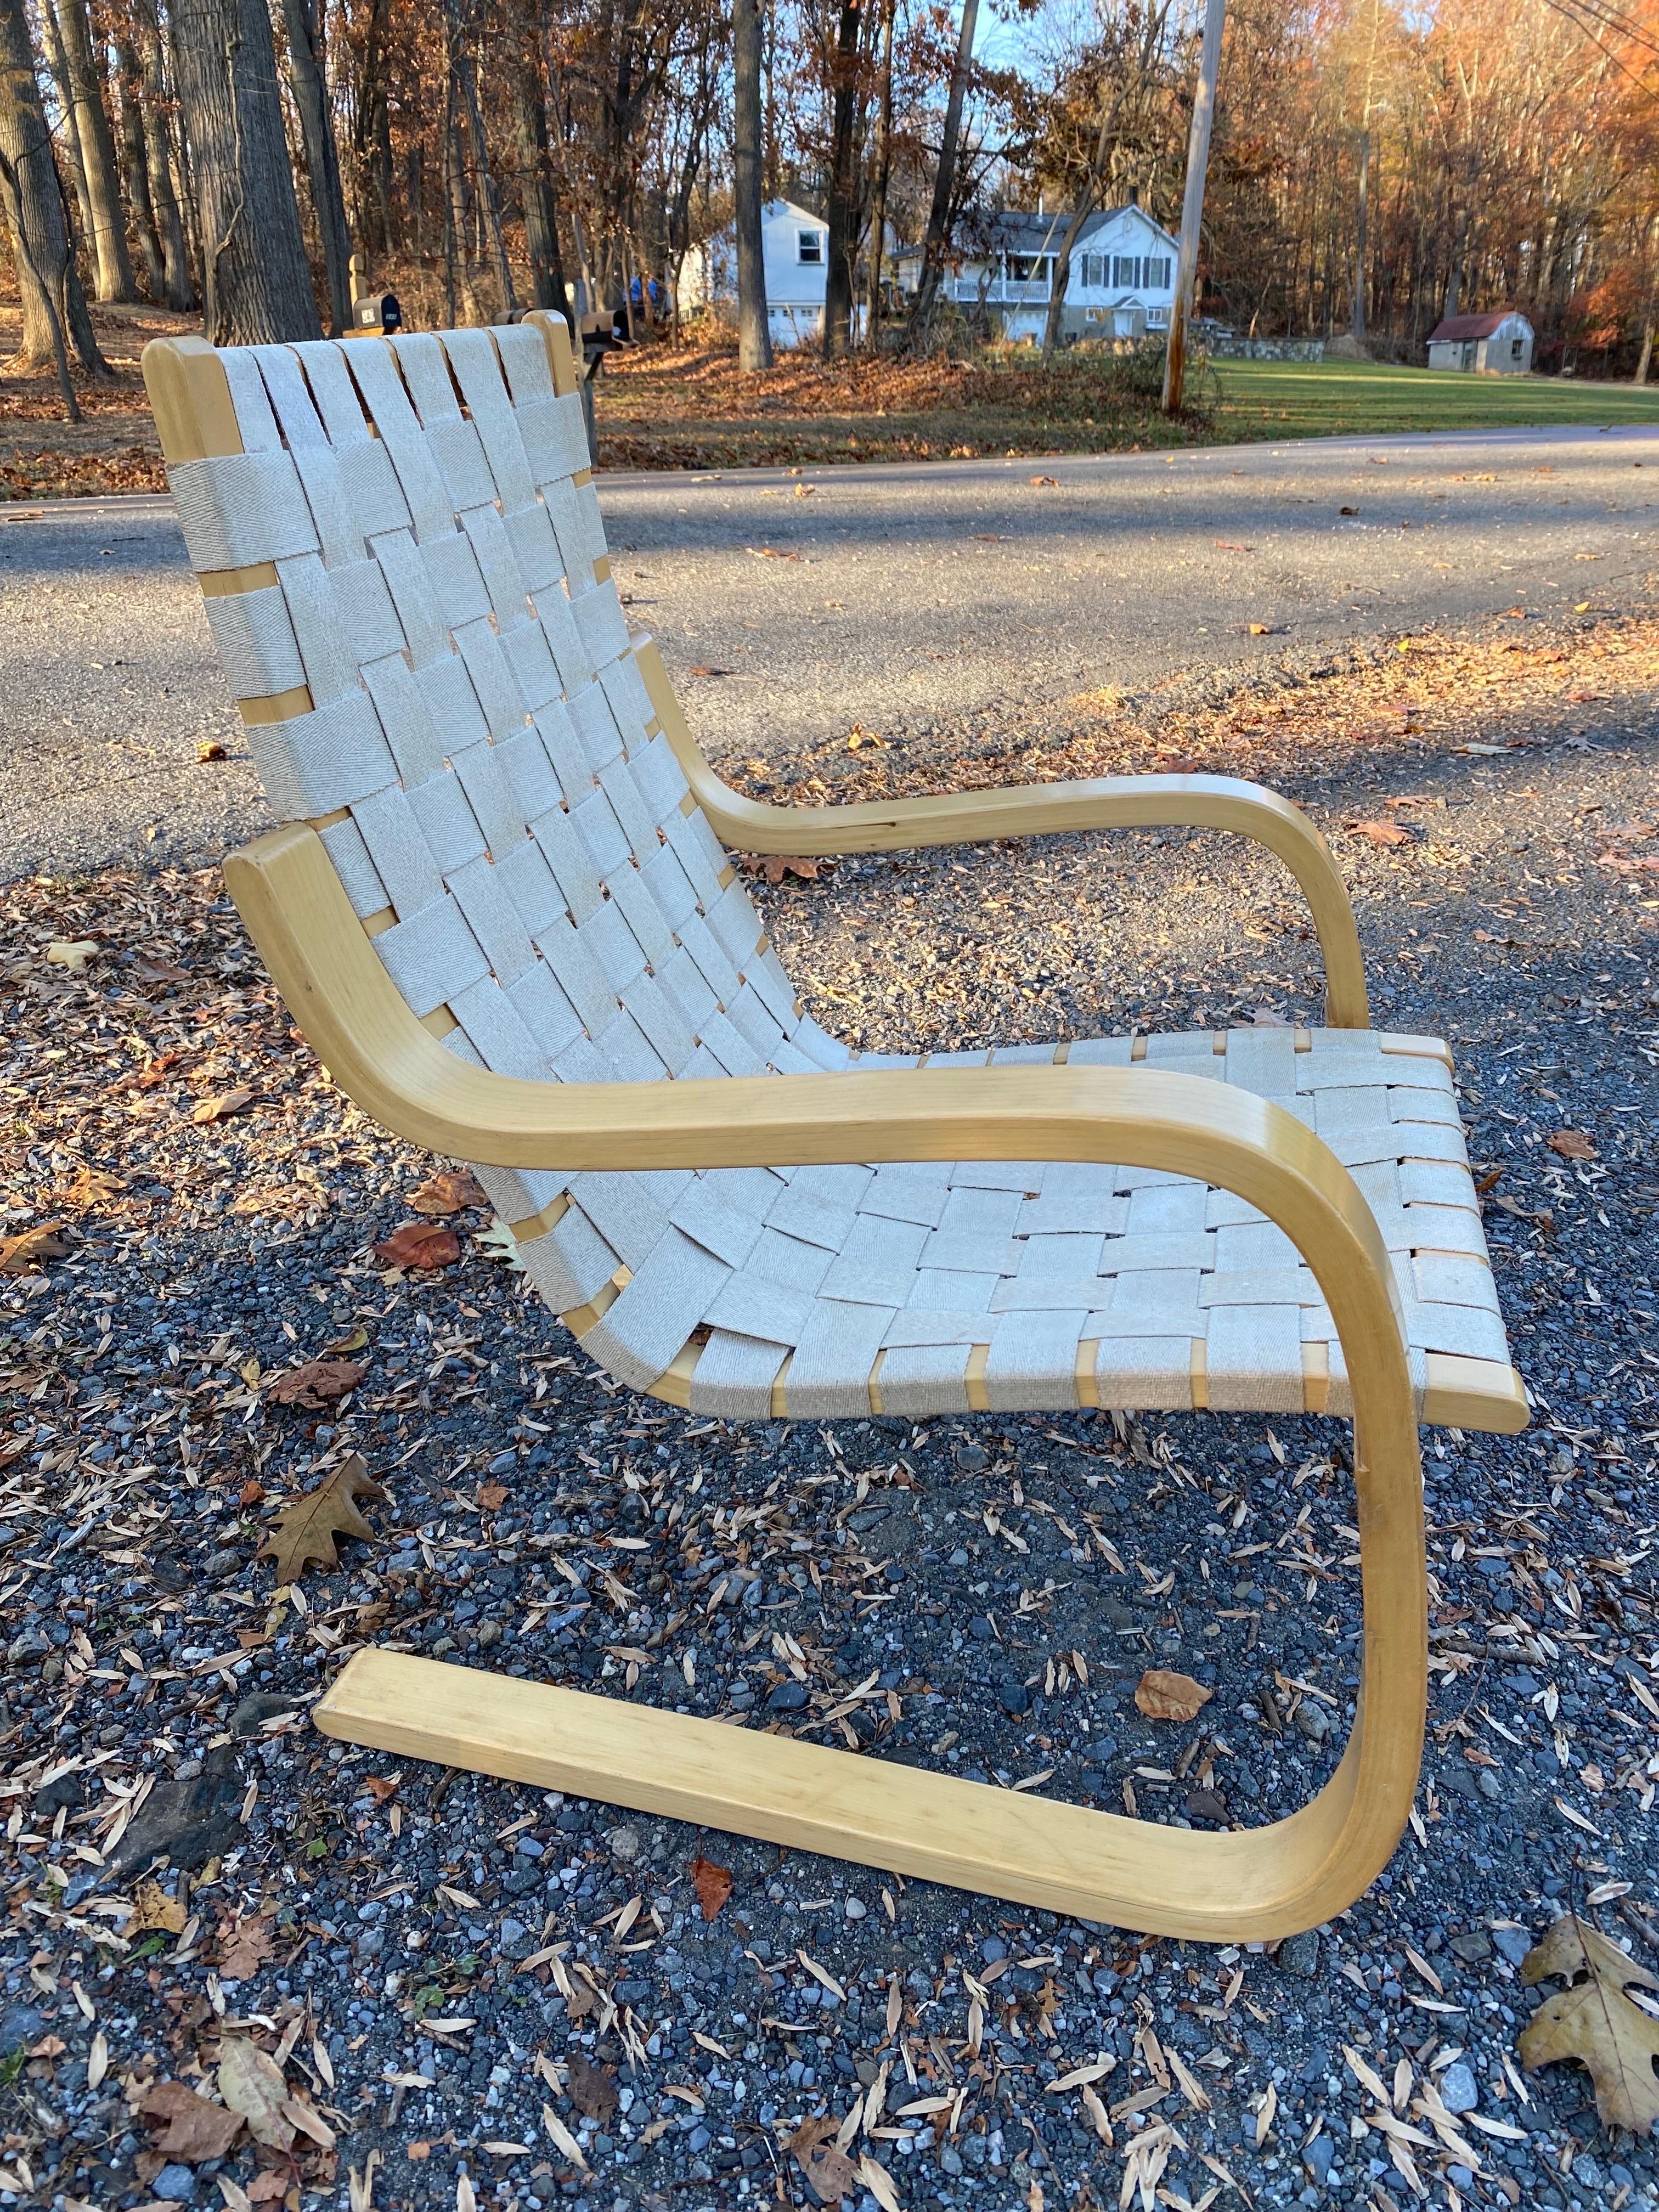 Alvar Aalto Linen and Beech Lounge Chair in very good original condition!  2nd one available with more wear showing on the seat area of the linen.  Later photos are showing the 2nd chair with a light area towards right side of seat.